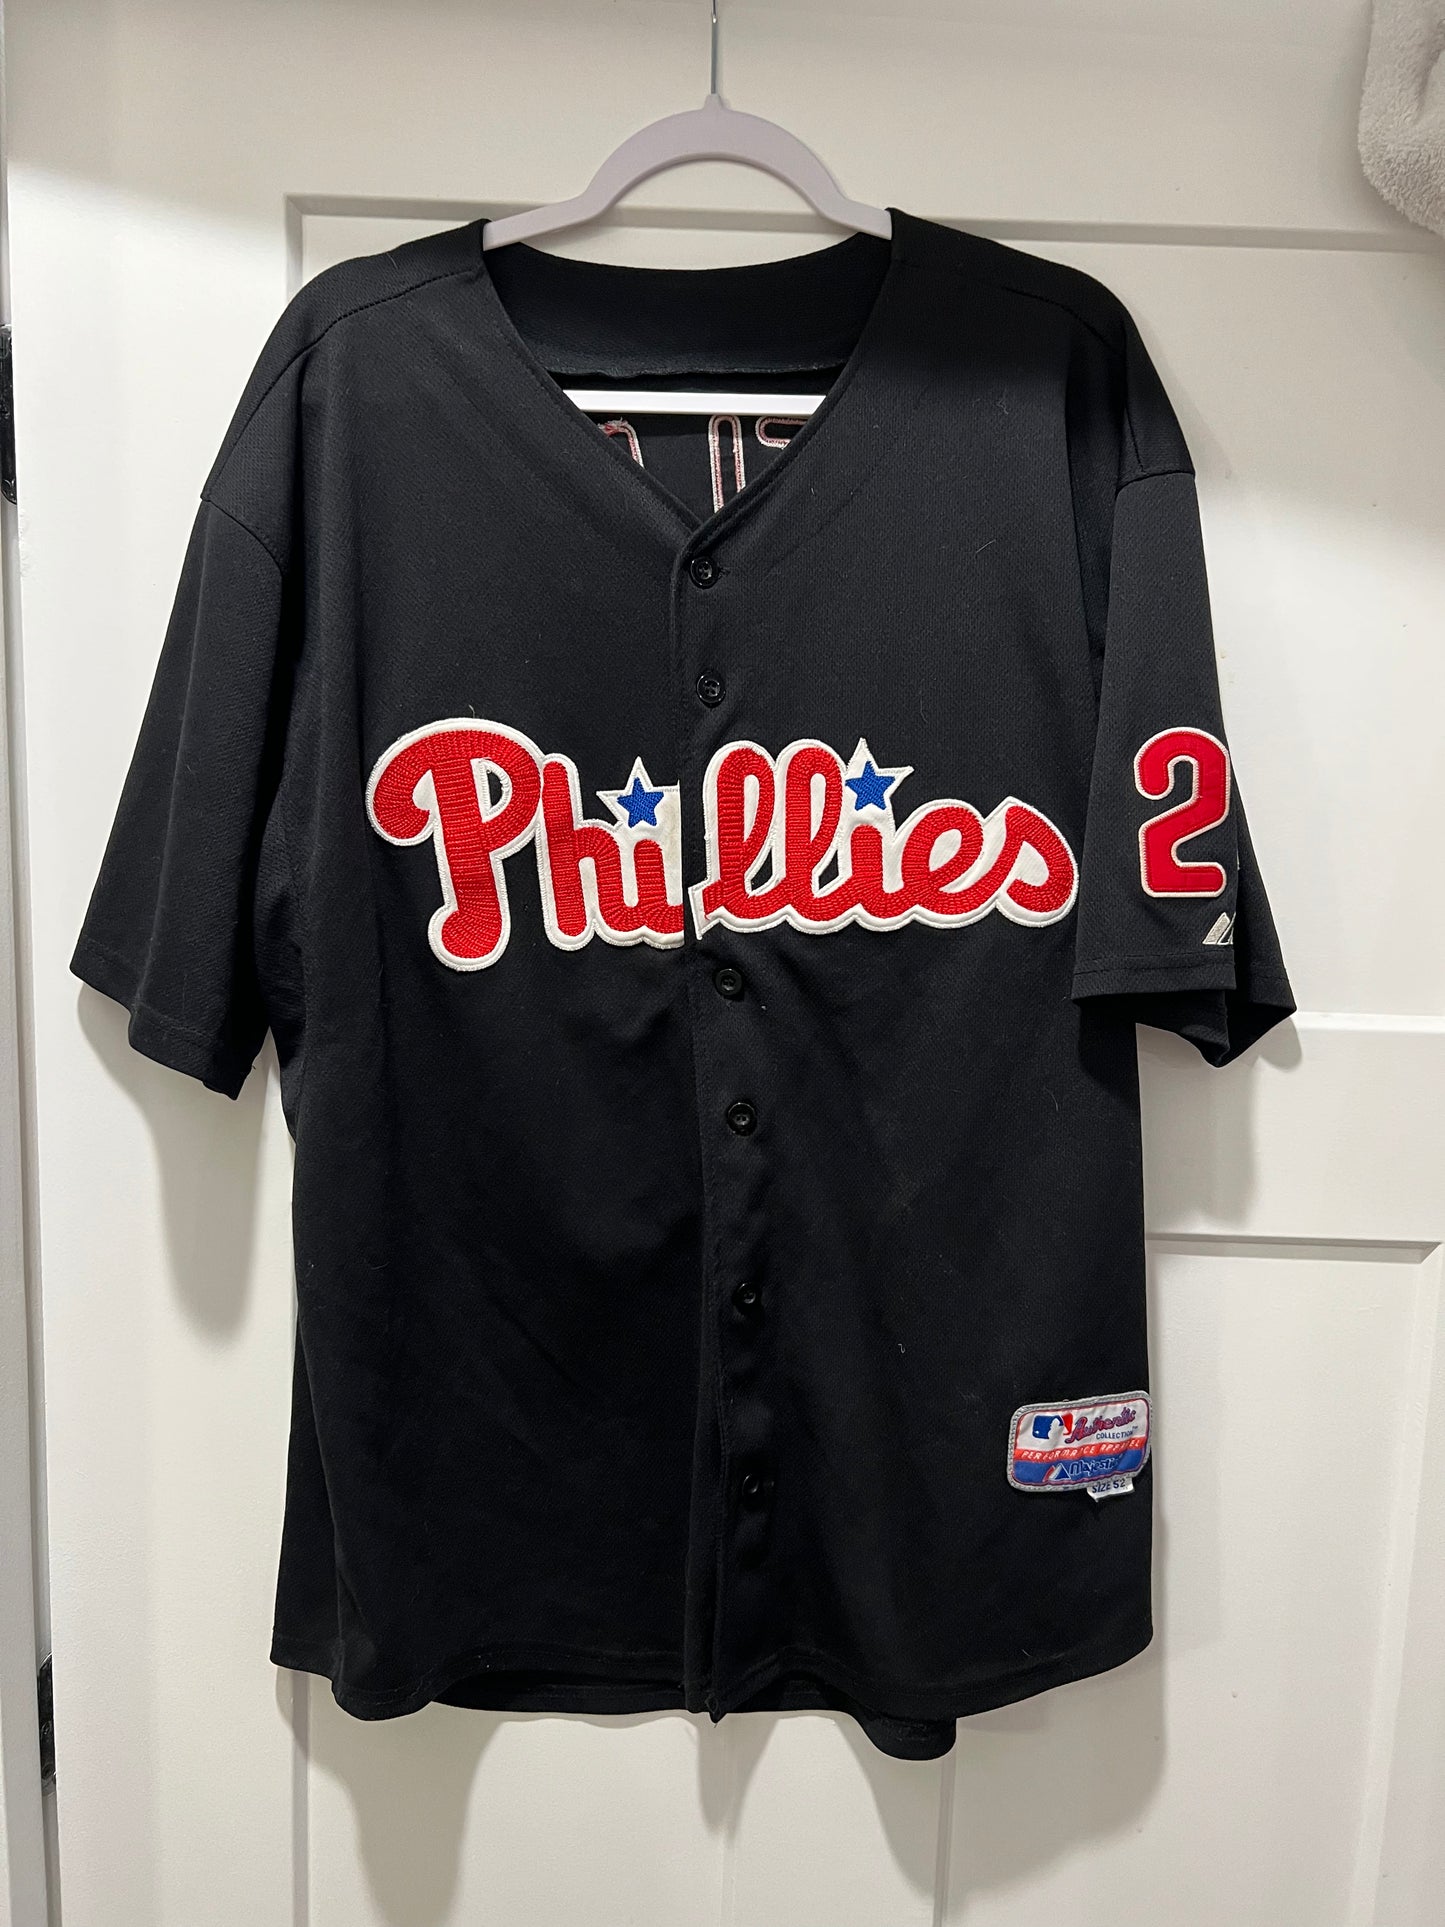 Chase Utley Phillies Jersey